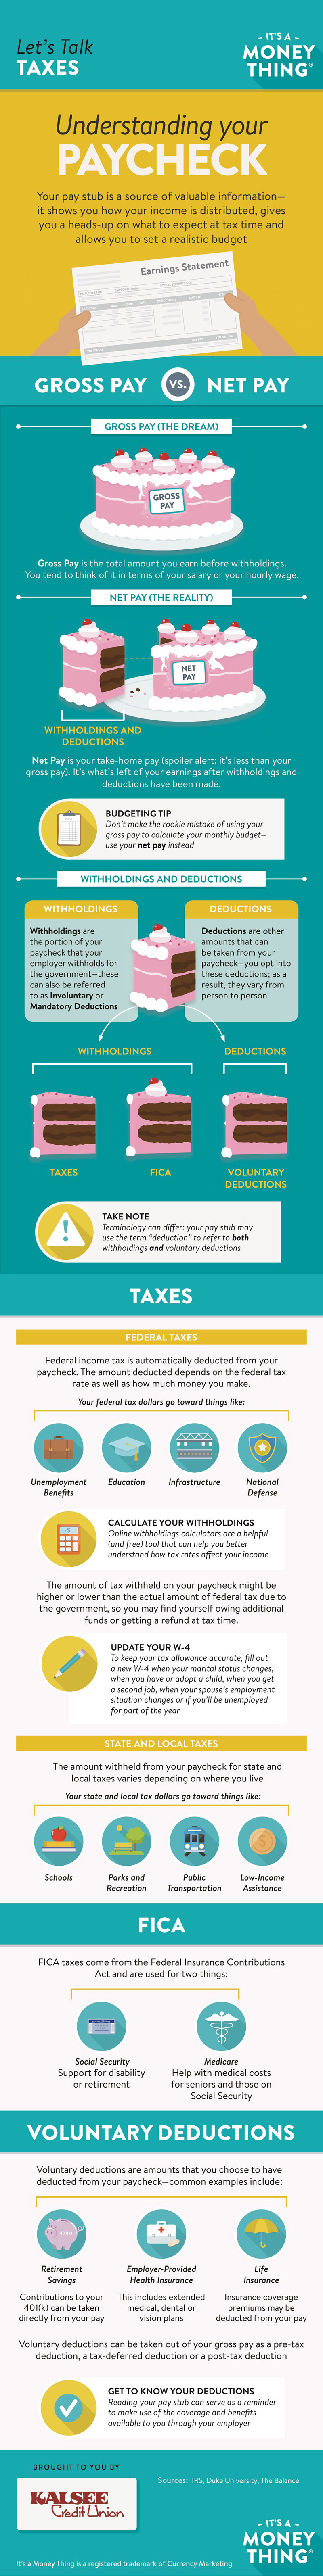 let's talk about taxes infographic, click for transcription